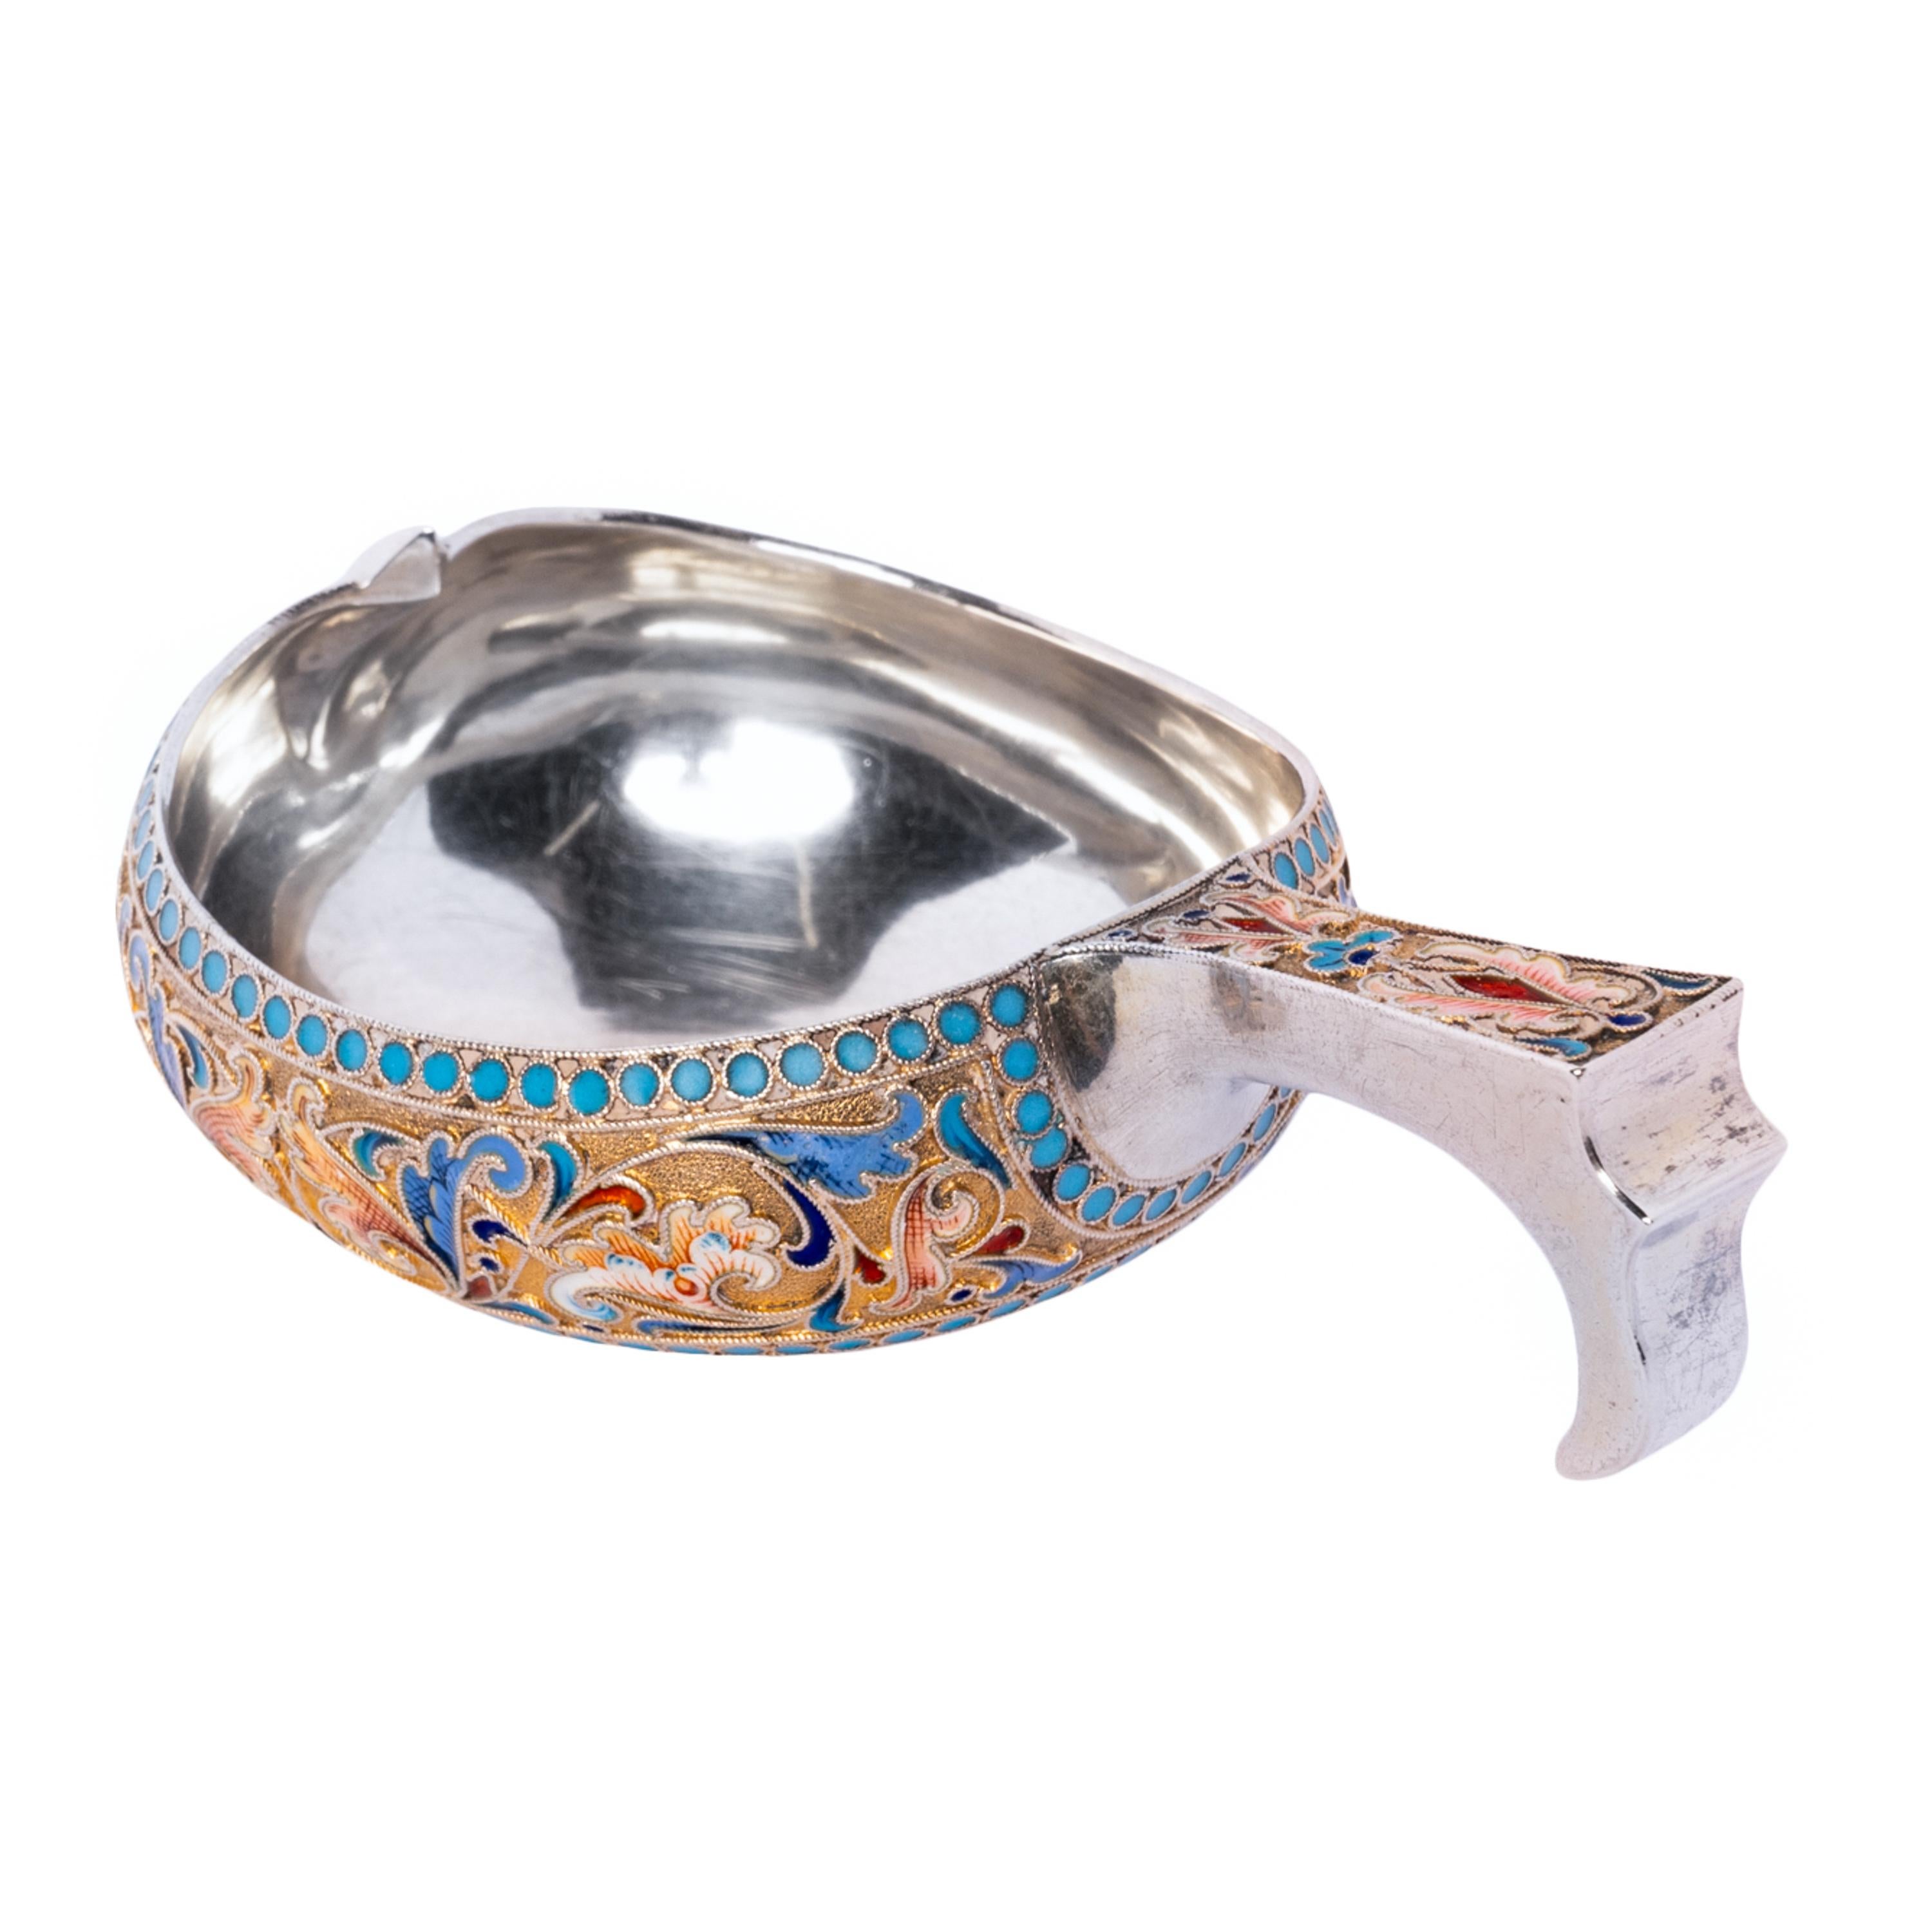 Antique Imperial Russian Silver Cloisonne Enamel Kovsh Ovchinnikov Moscow 1896 In Good Condition For Sale In Portland, OR